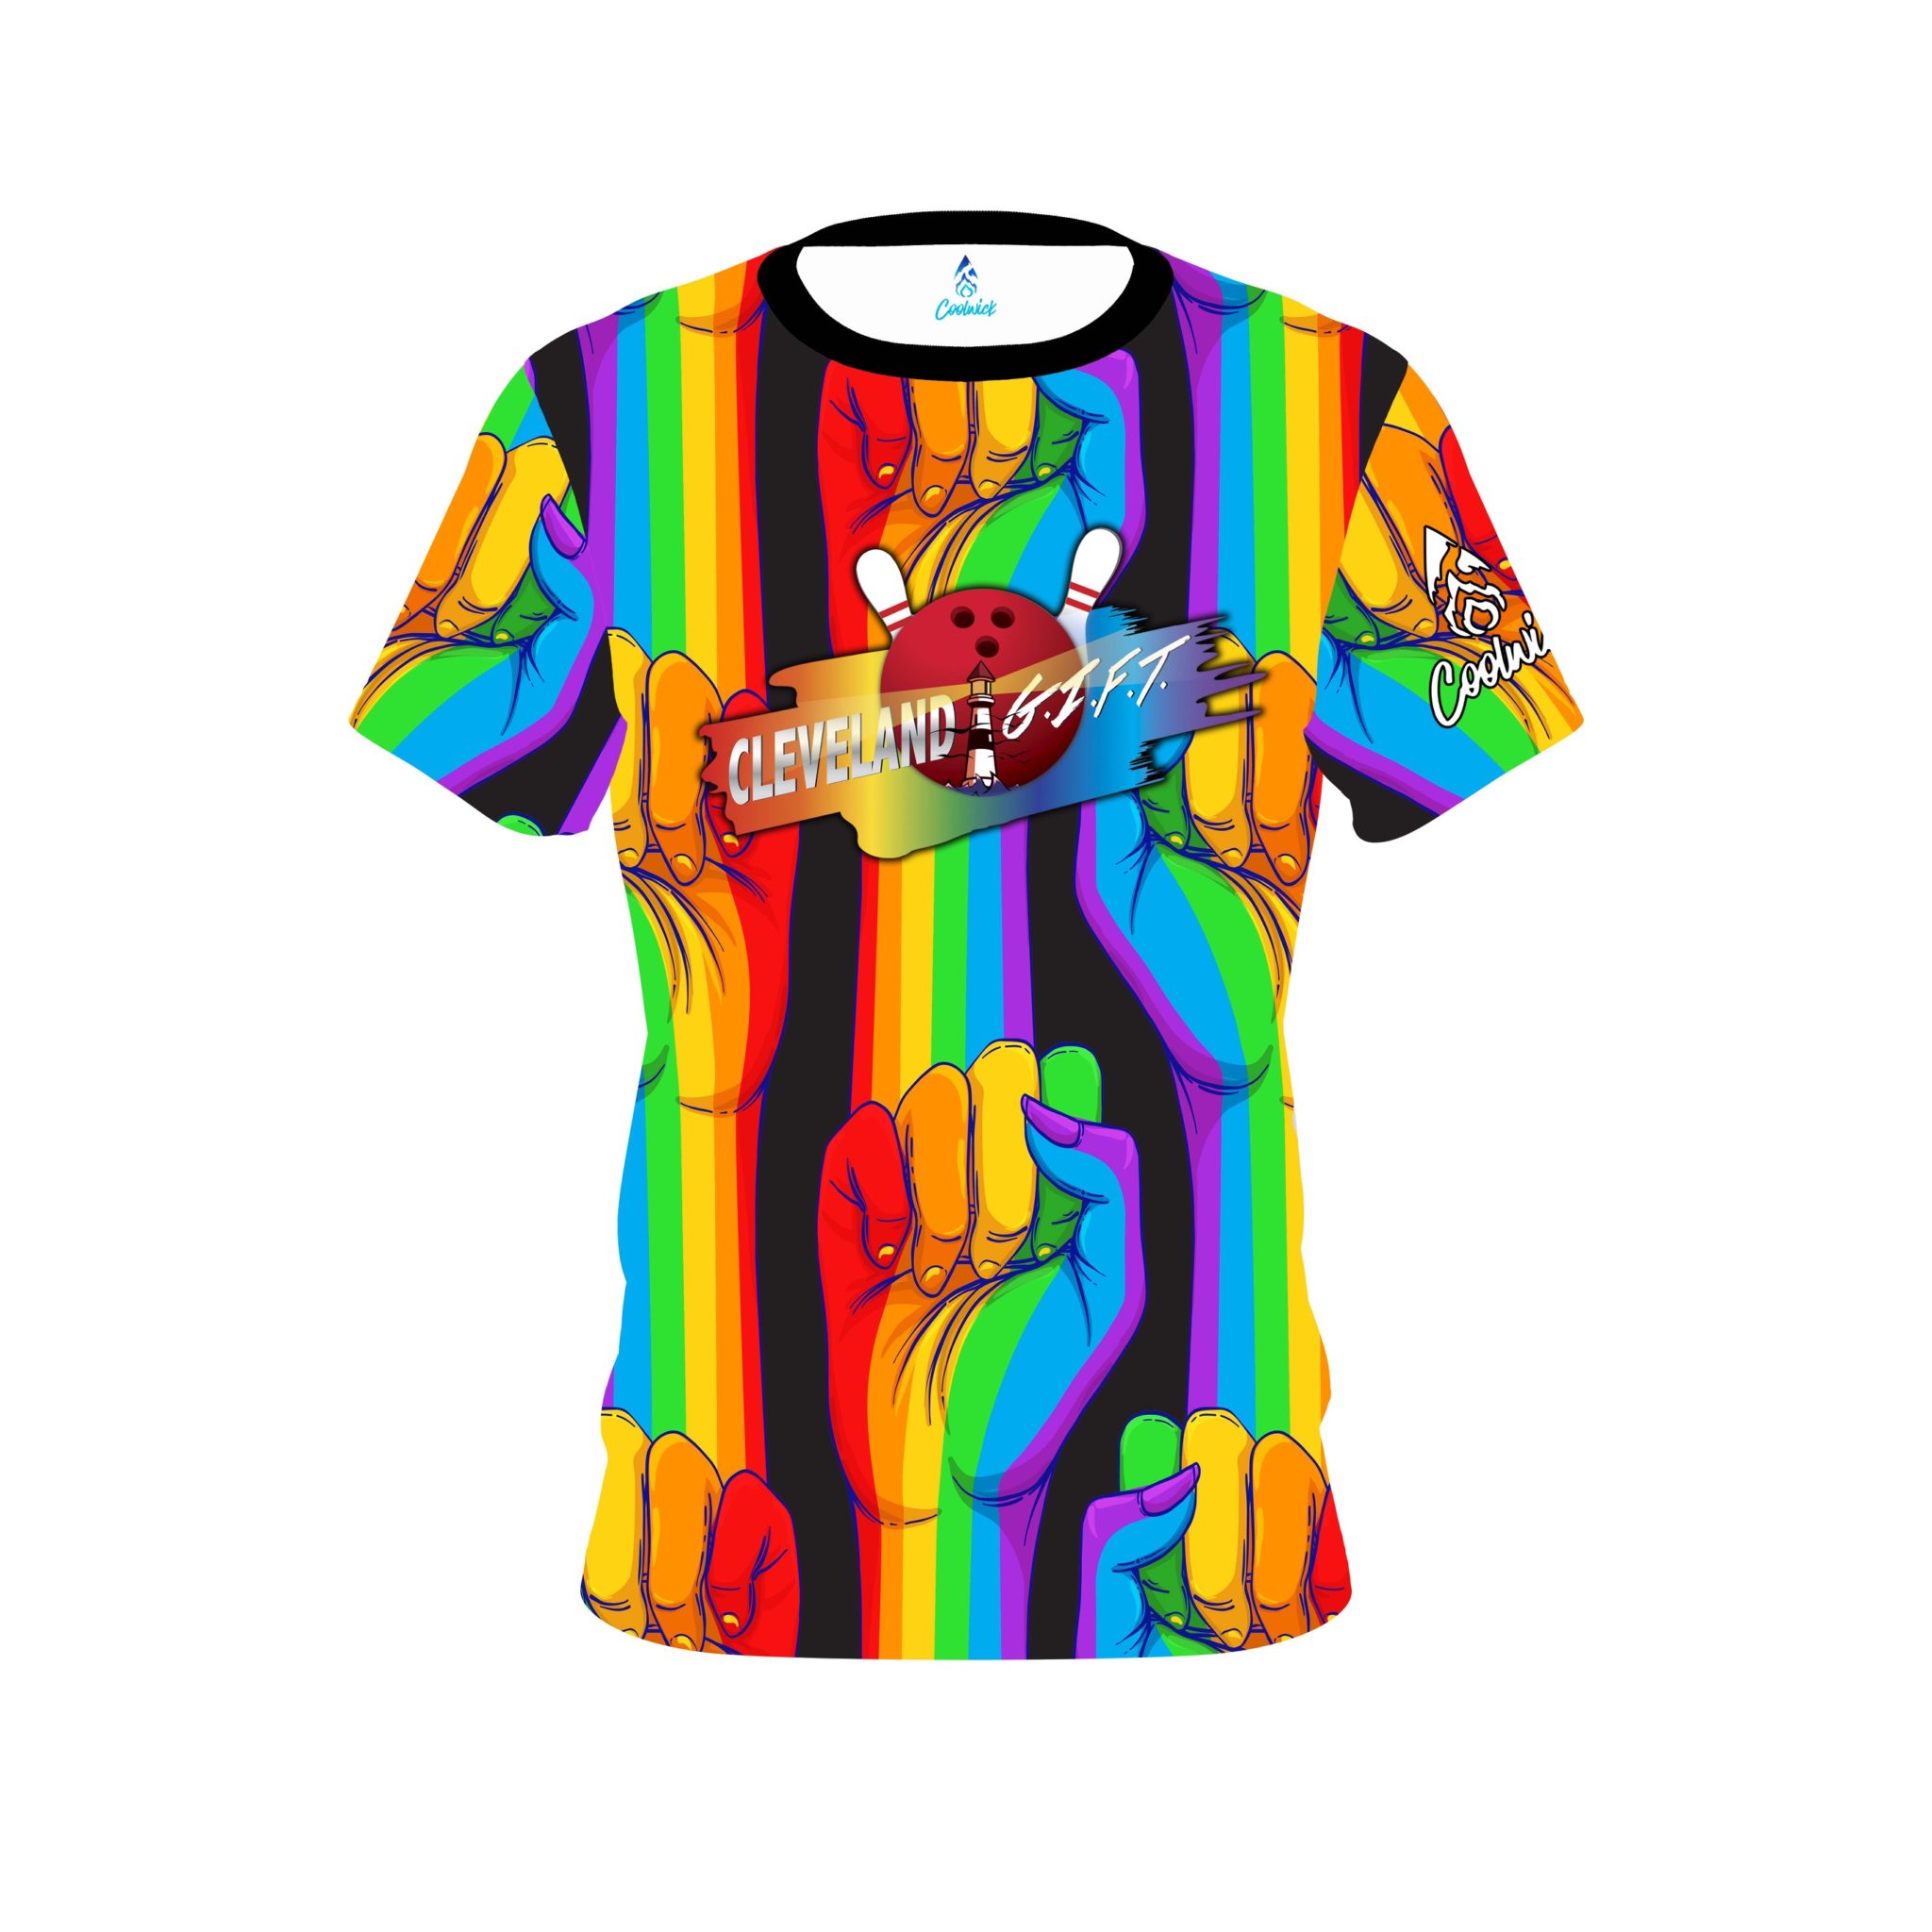 Cleveland G.I.F.T. CoolWick Rainbow Hands Bowling Jersey